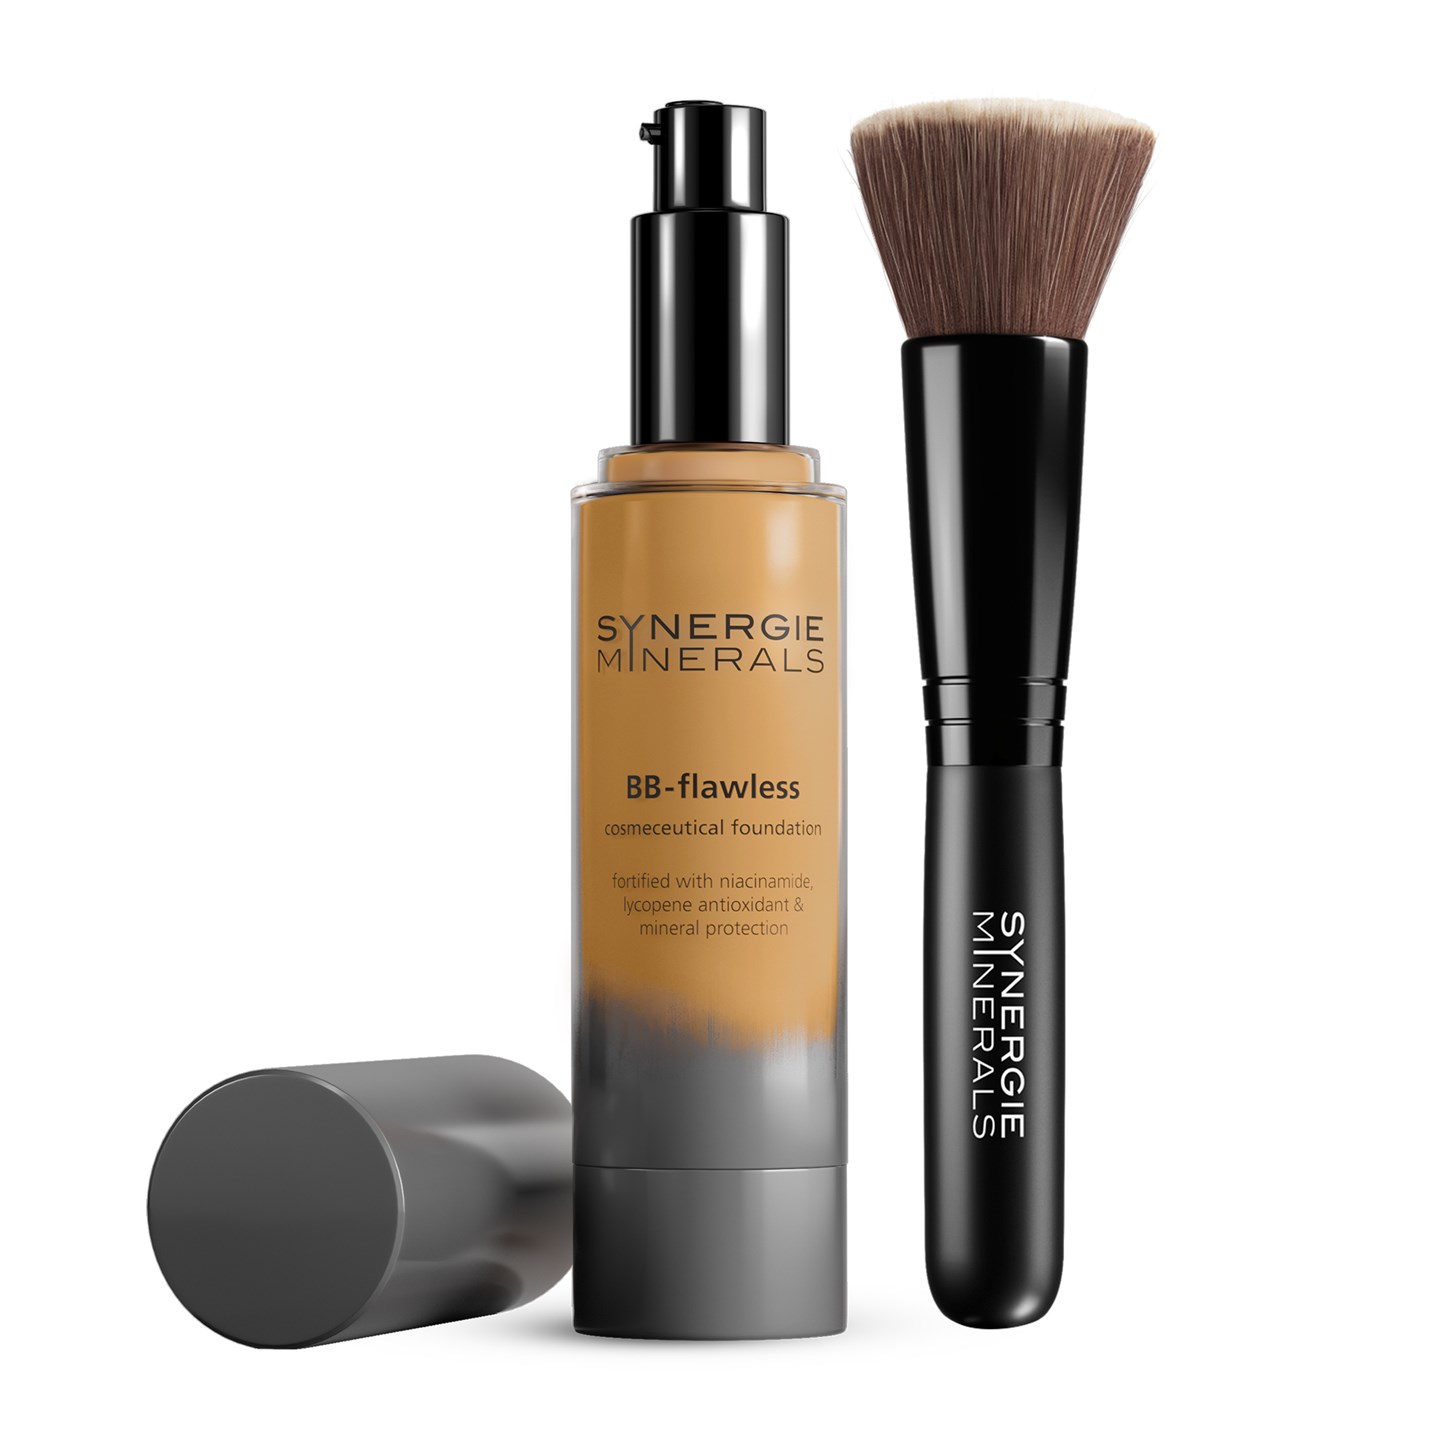 Synergie Minerals BB Flawless plus Air Brush Bundle